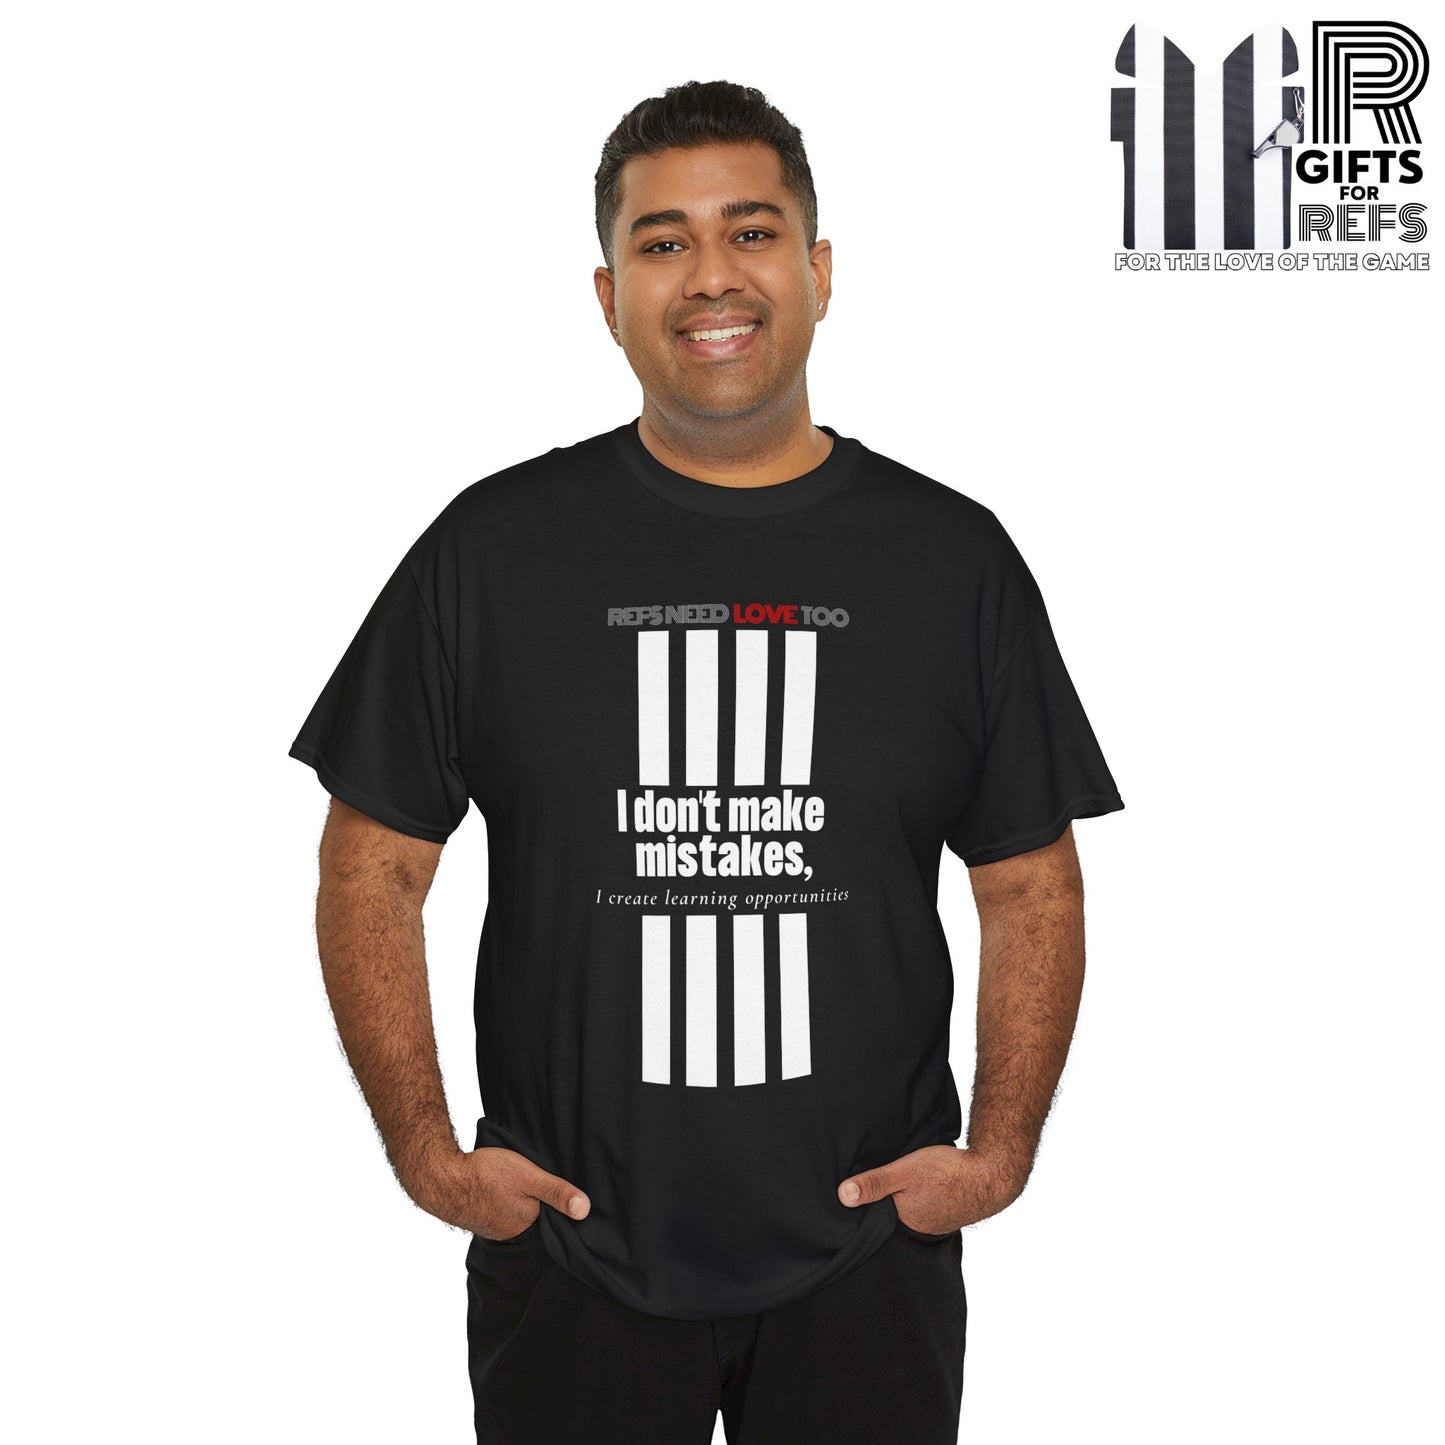 I don't make mistakes cotton tee | white lettering | Referee t shirt | Great Gifts for refs and umps | screen printed t shirt | Referee apparel | Refs Need Love Too